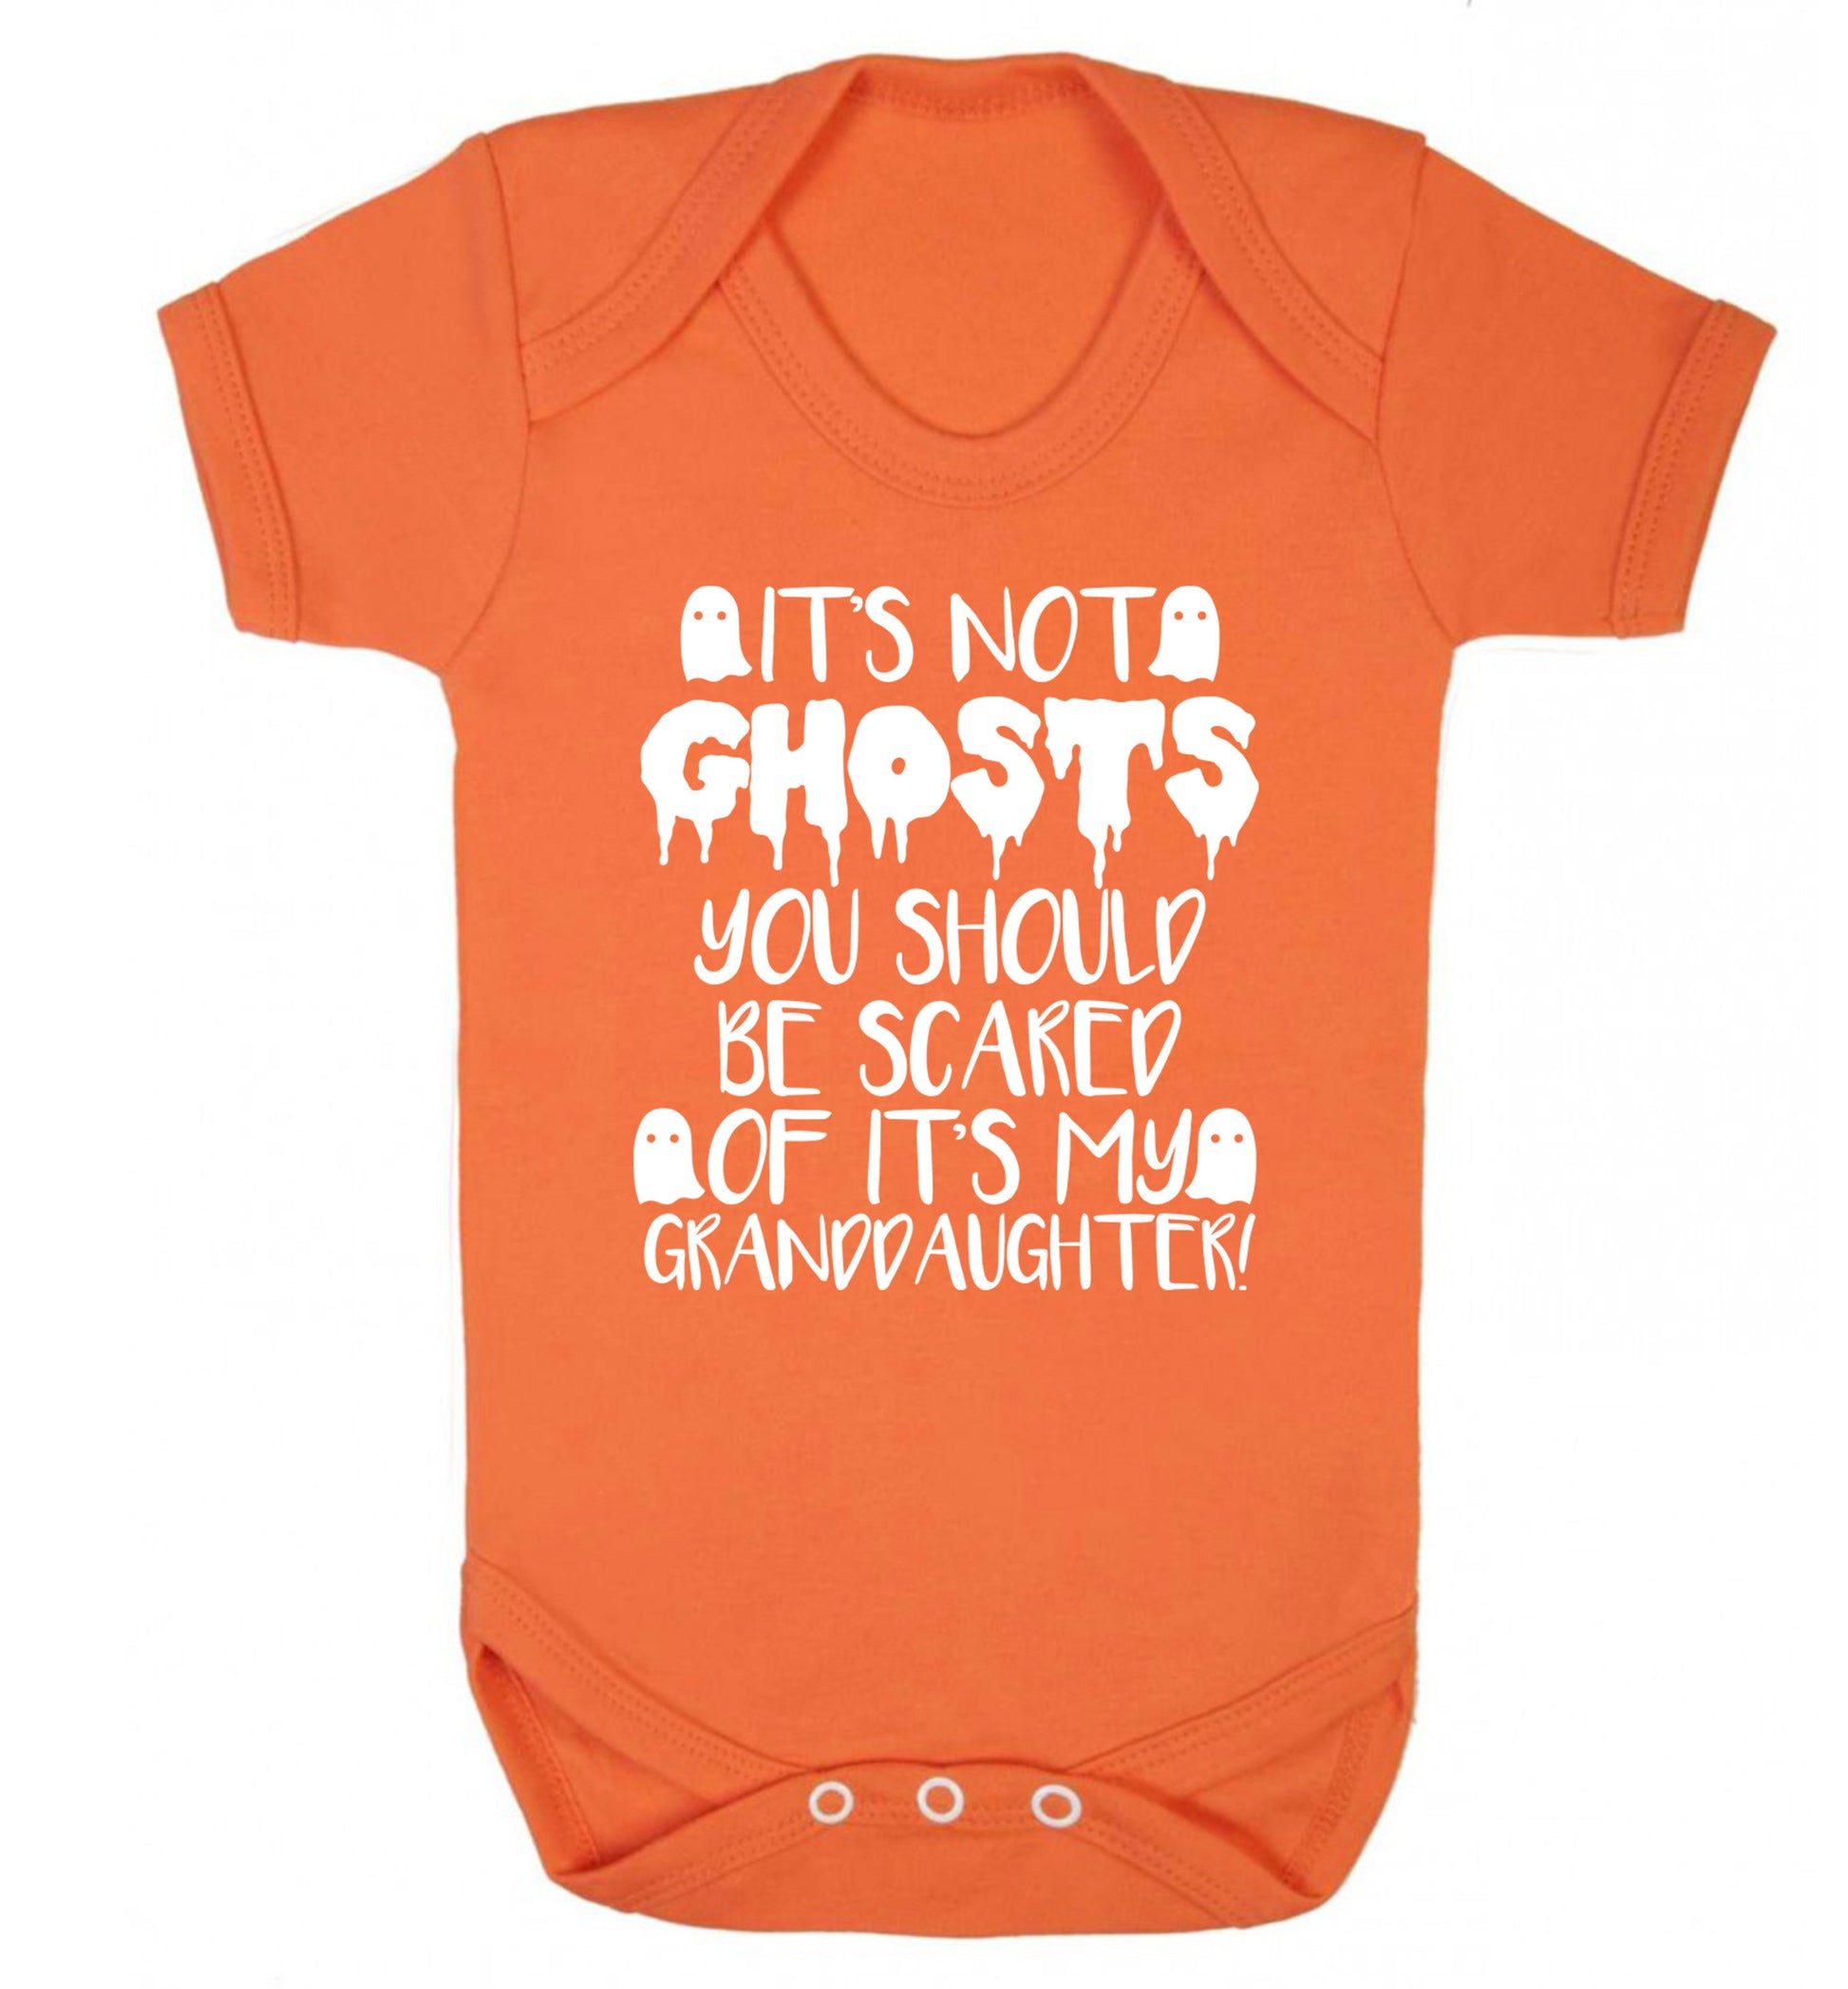 It's not ghosts you should be scared of it's my granddaughter! Baby Vest orange 18-24 months